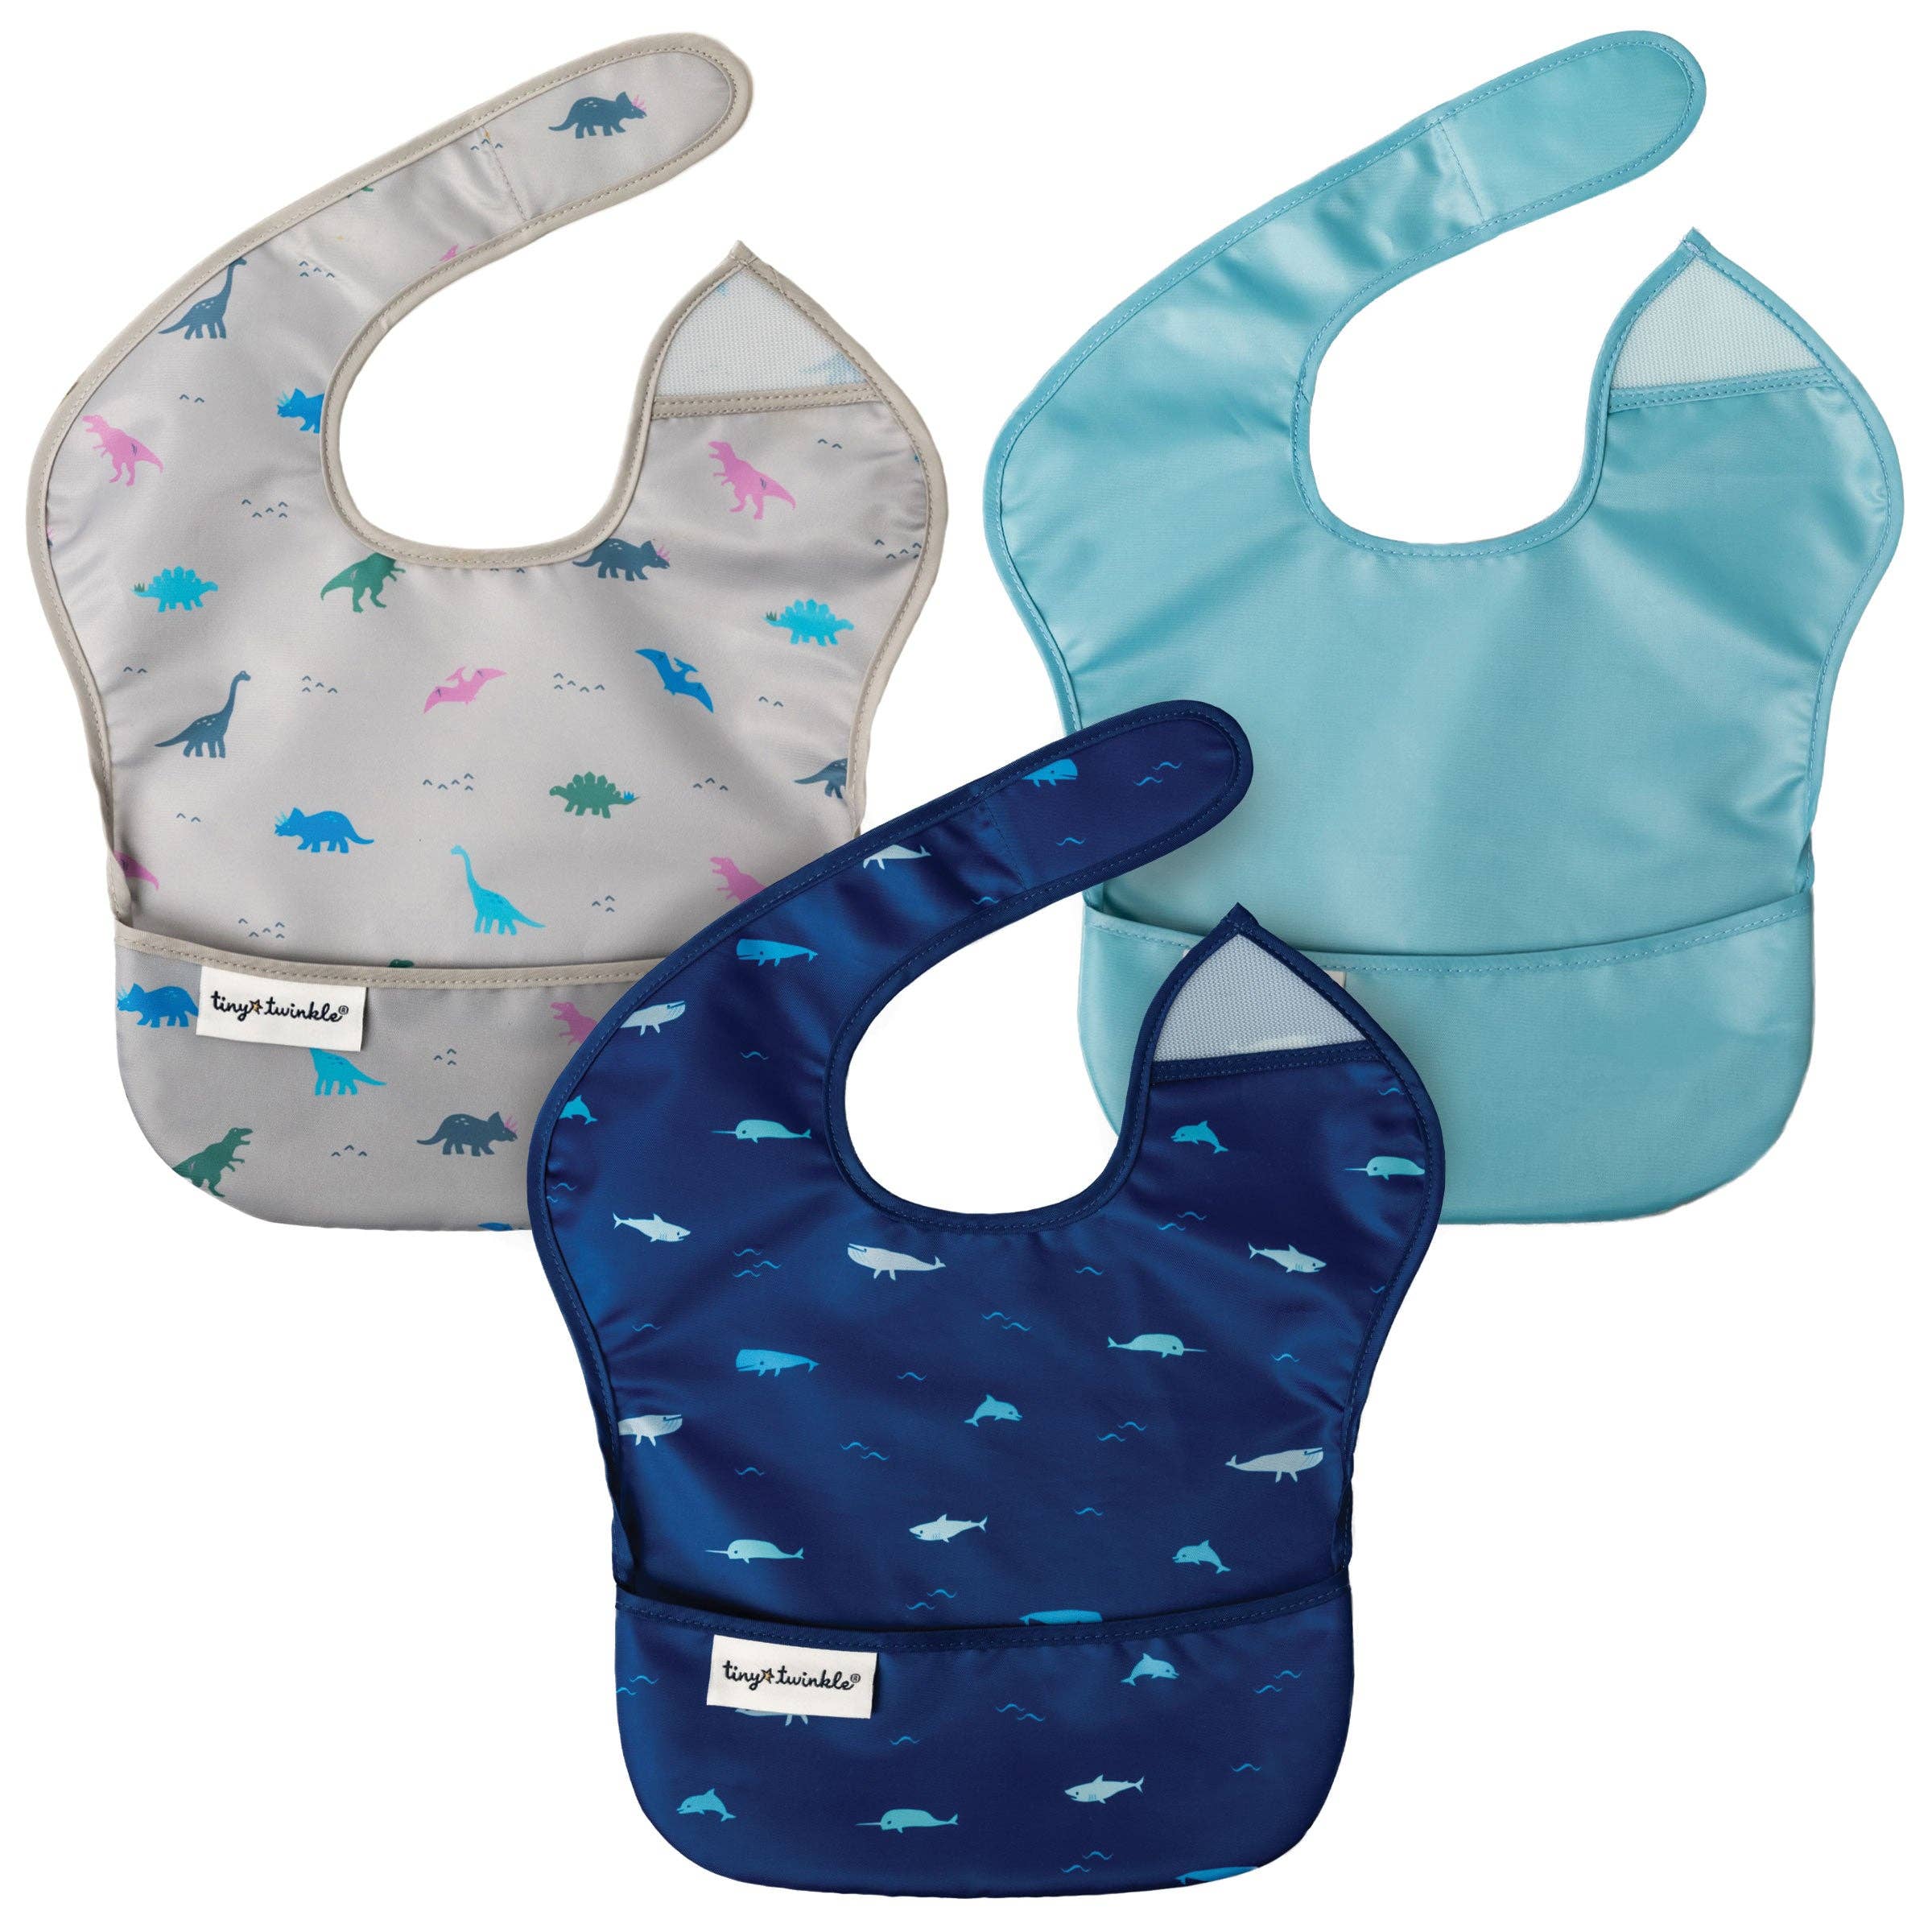 Brother Max Baby Gift Bundle Easy Hold Bowls and Catch & Fold Bibs 4 Months Up 